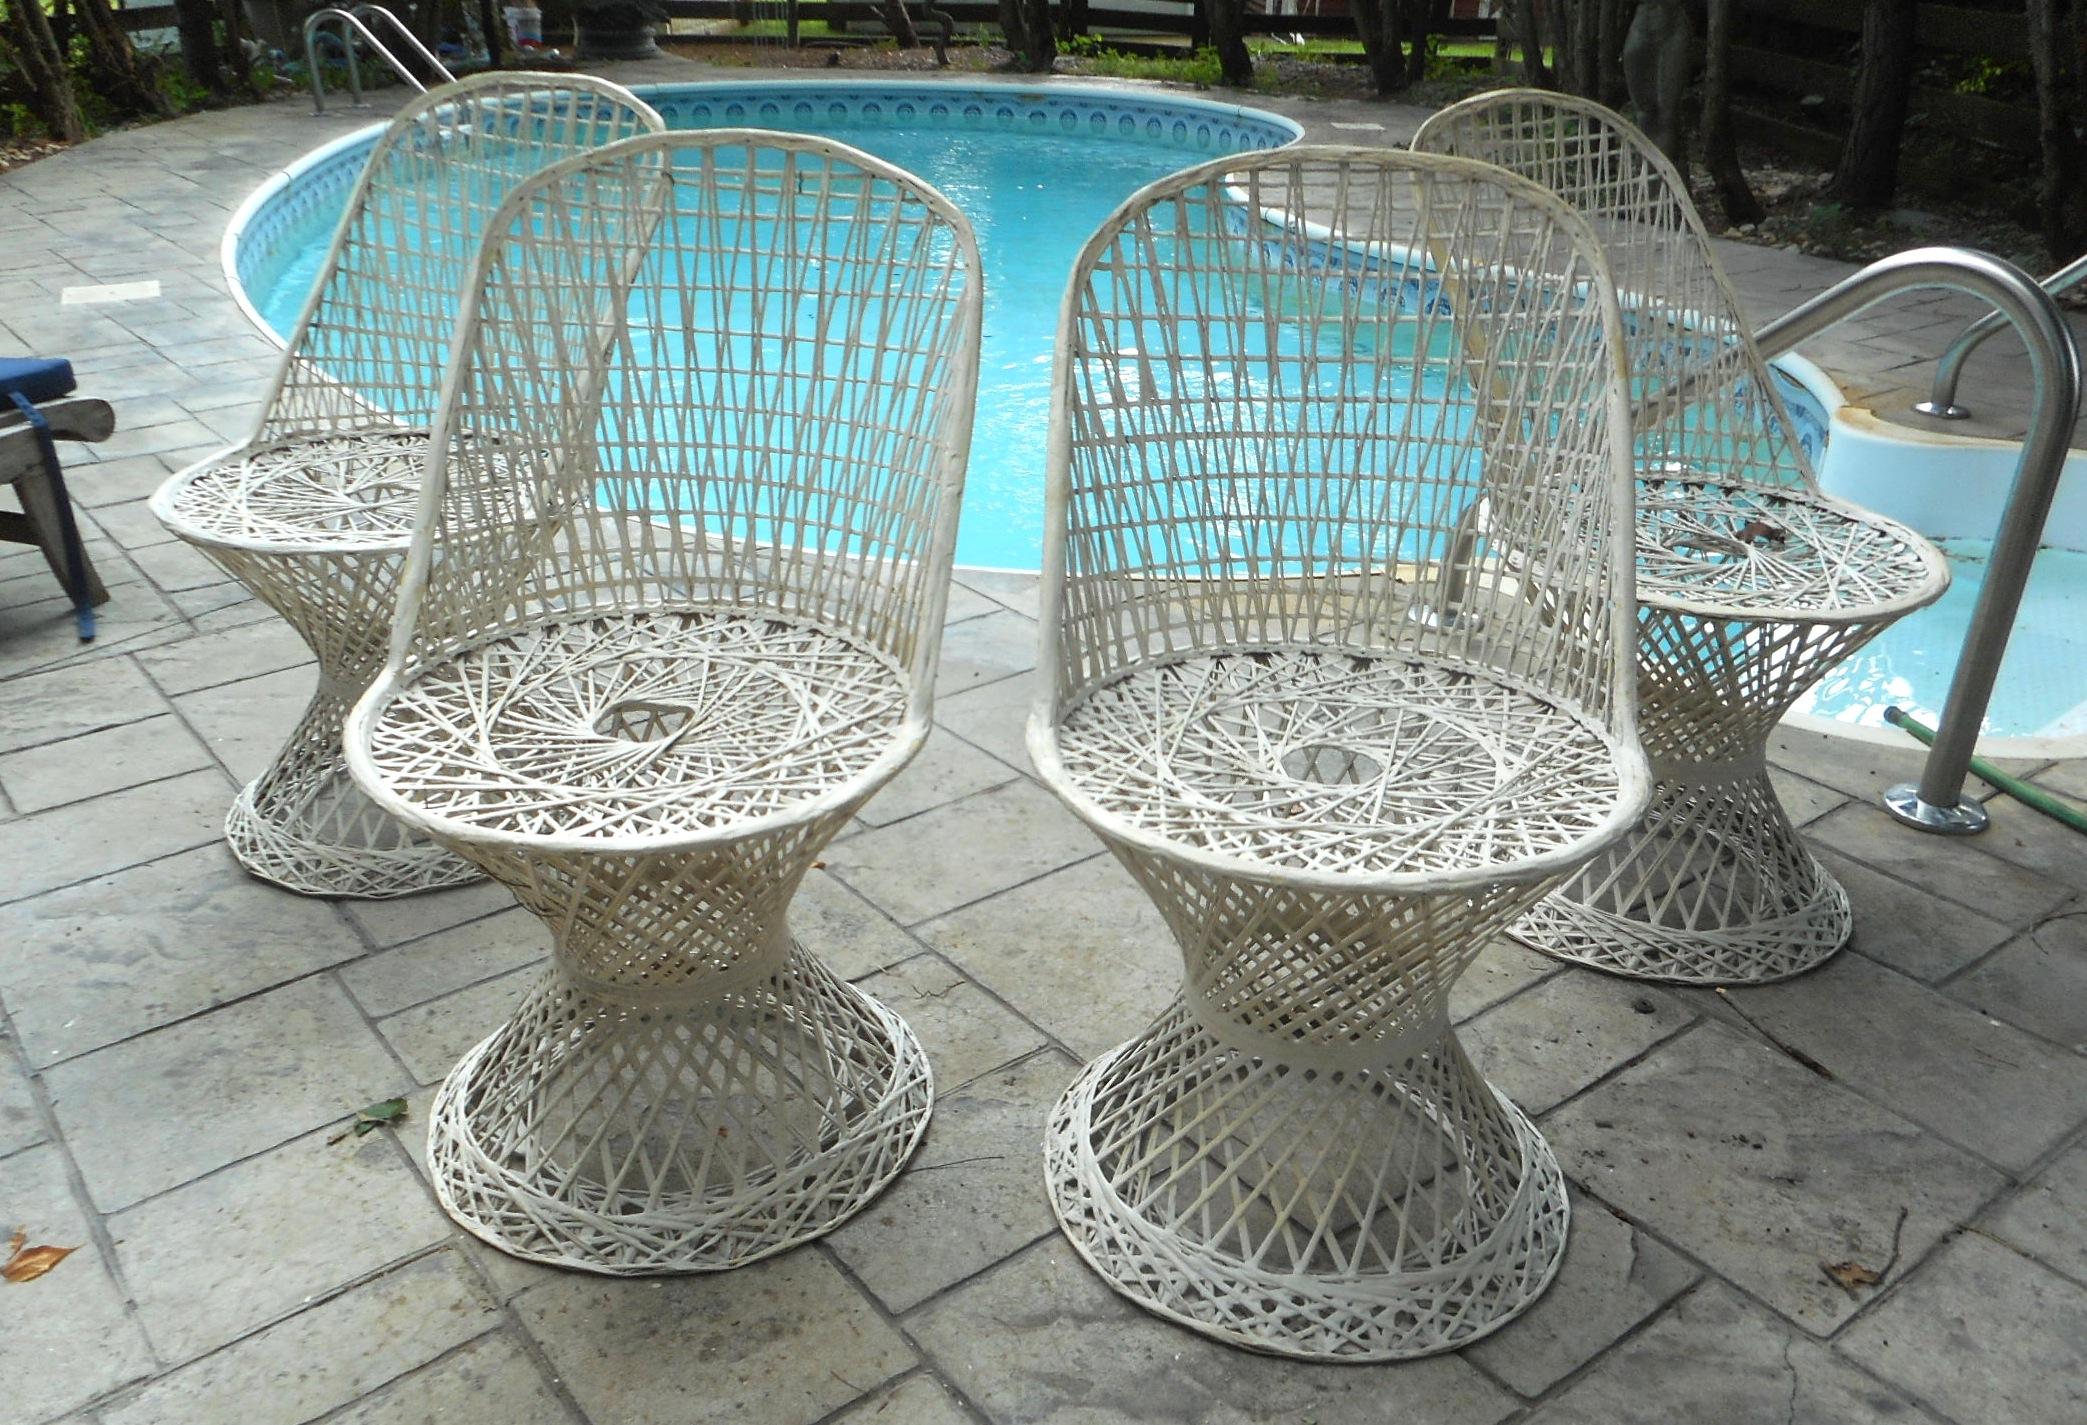 This beautiful vintage patio set includes a glass top table, four chairs, and three planters. The unique round glass top table features a tulip shaped spun fiberglass base. The stunning set of four sculpted patio chairs and three tulip shaped